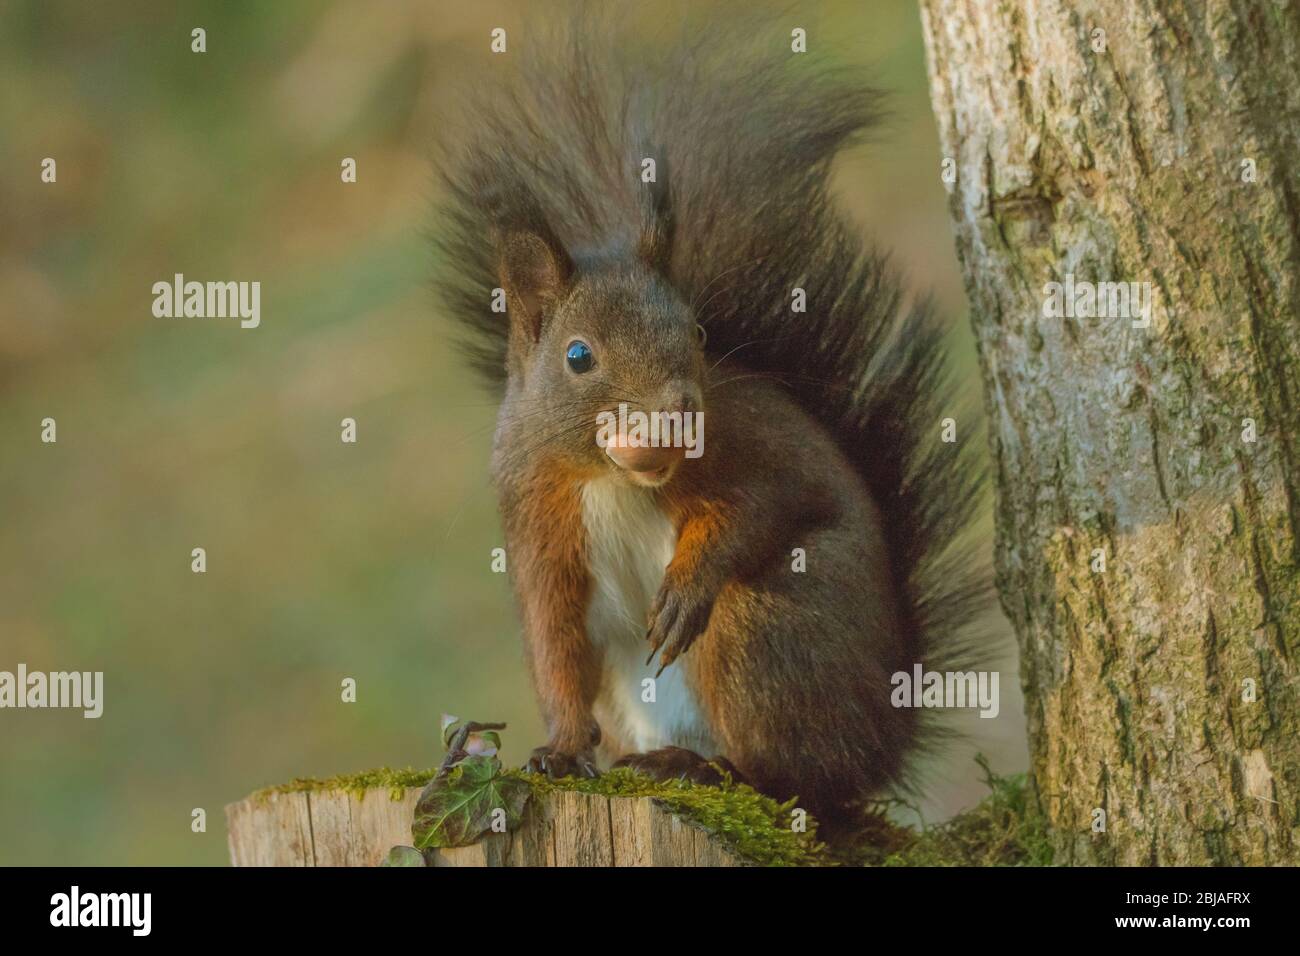 European red squirrel, Eurasian red squirrel (Sciurus vulgaris), sits on a tree snag wit a hazelnut in its mouth, front view, Switzerland, Sankt Gallen Stock Photo